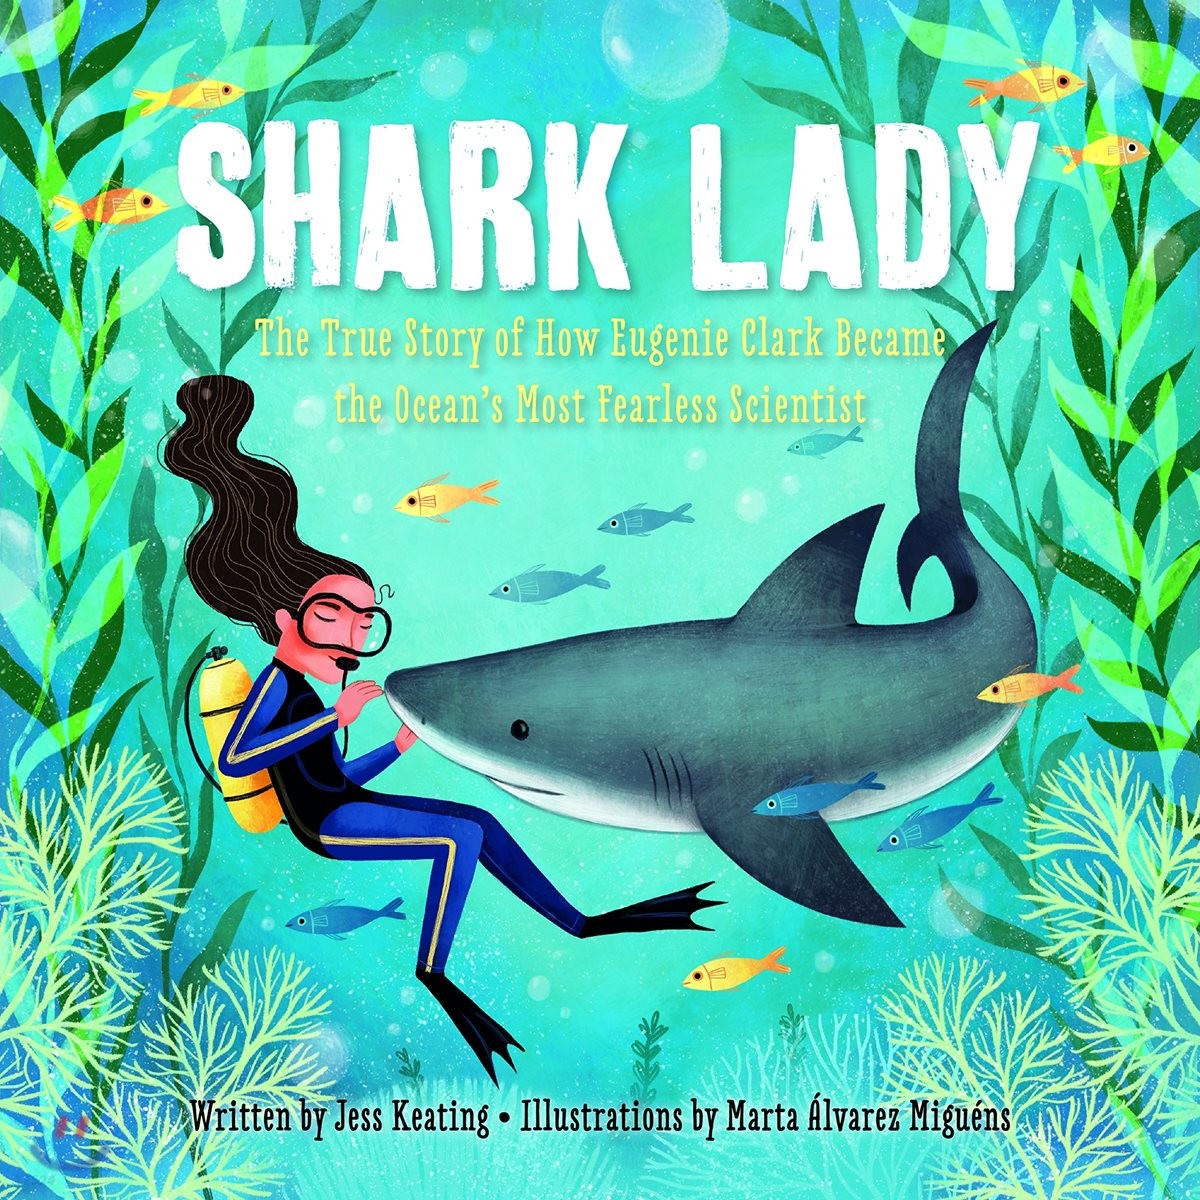 Shark lady  : the true story of how Eugenie Clark became the ocean's most fearless scientist